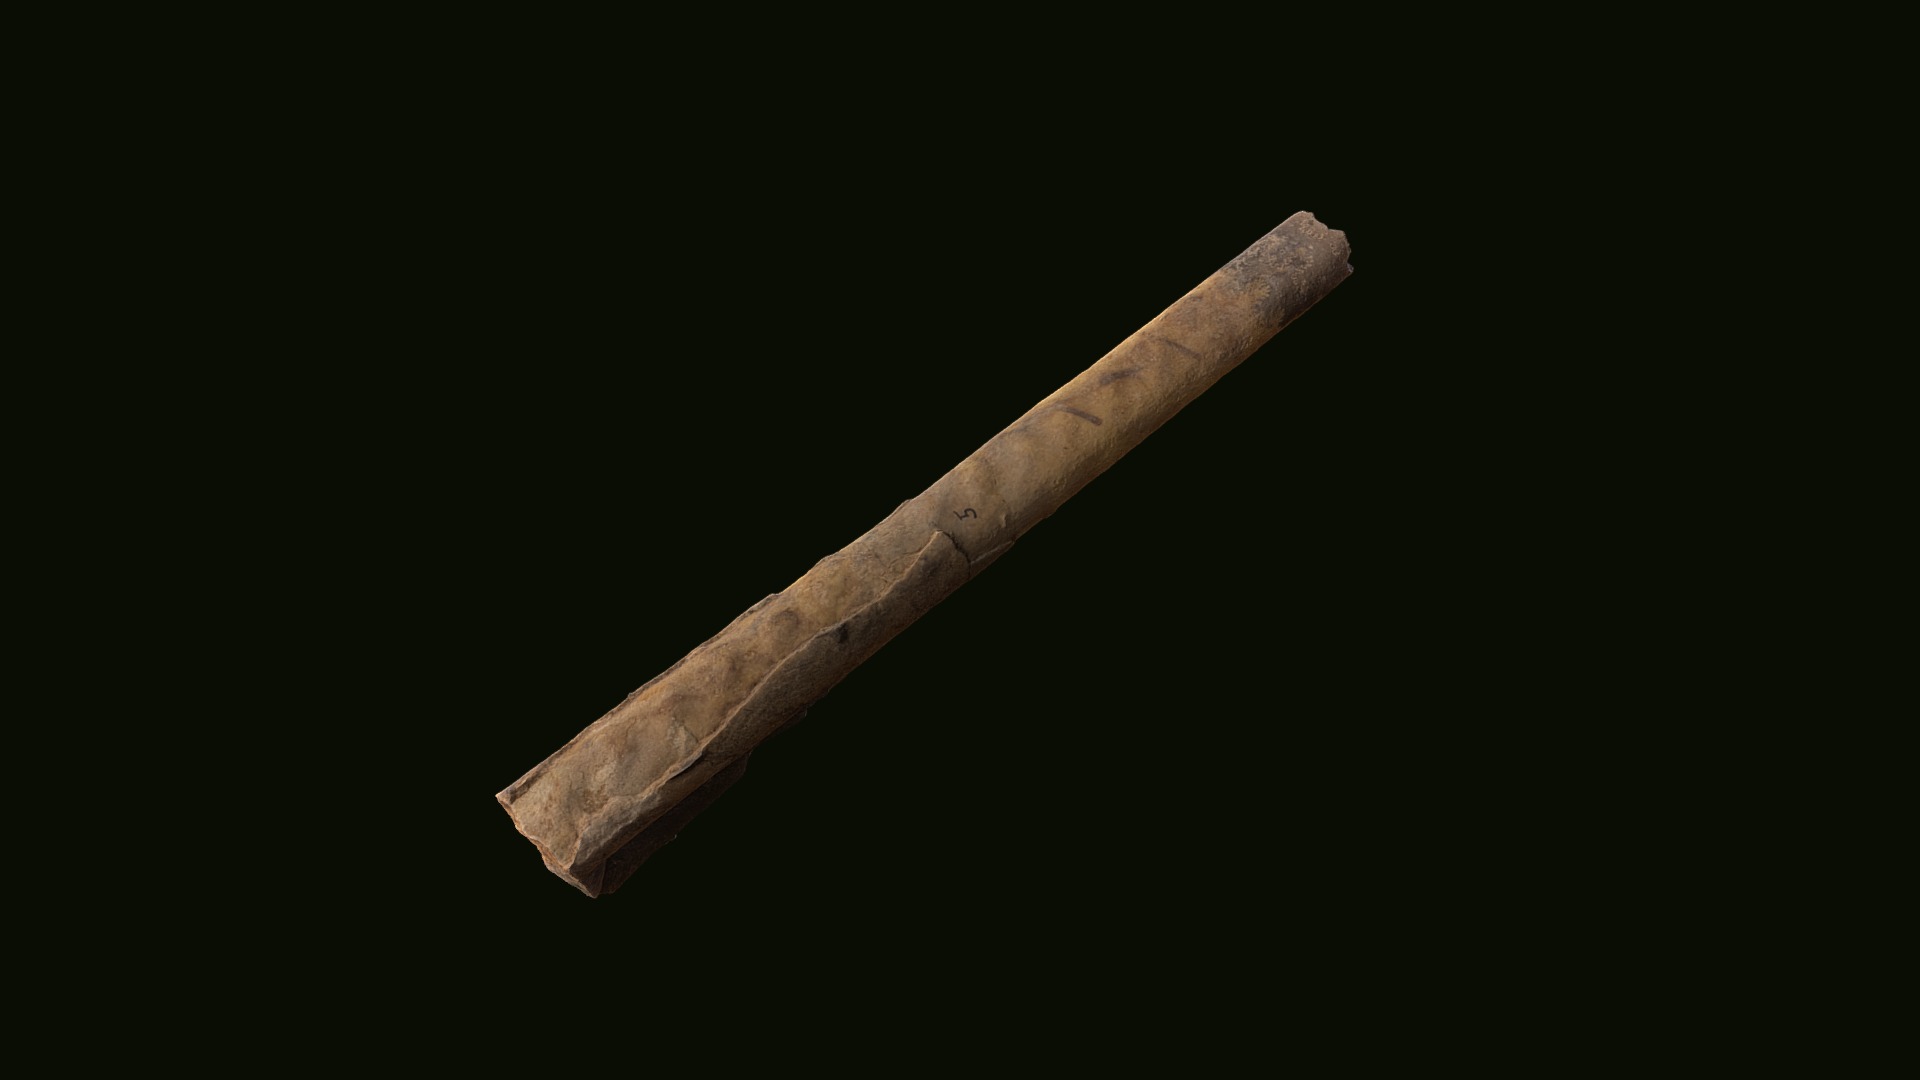 3D model Baculites obtusus D139 Fall River County, SD - This is a 3D model of the Baculites obtusus D139 Fall River County, SD. The 3D model is about a wooden stick with a black background.